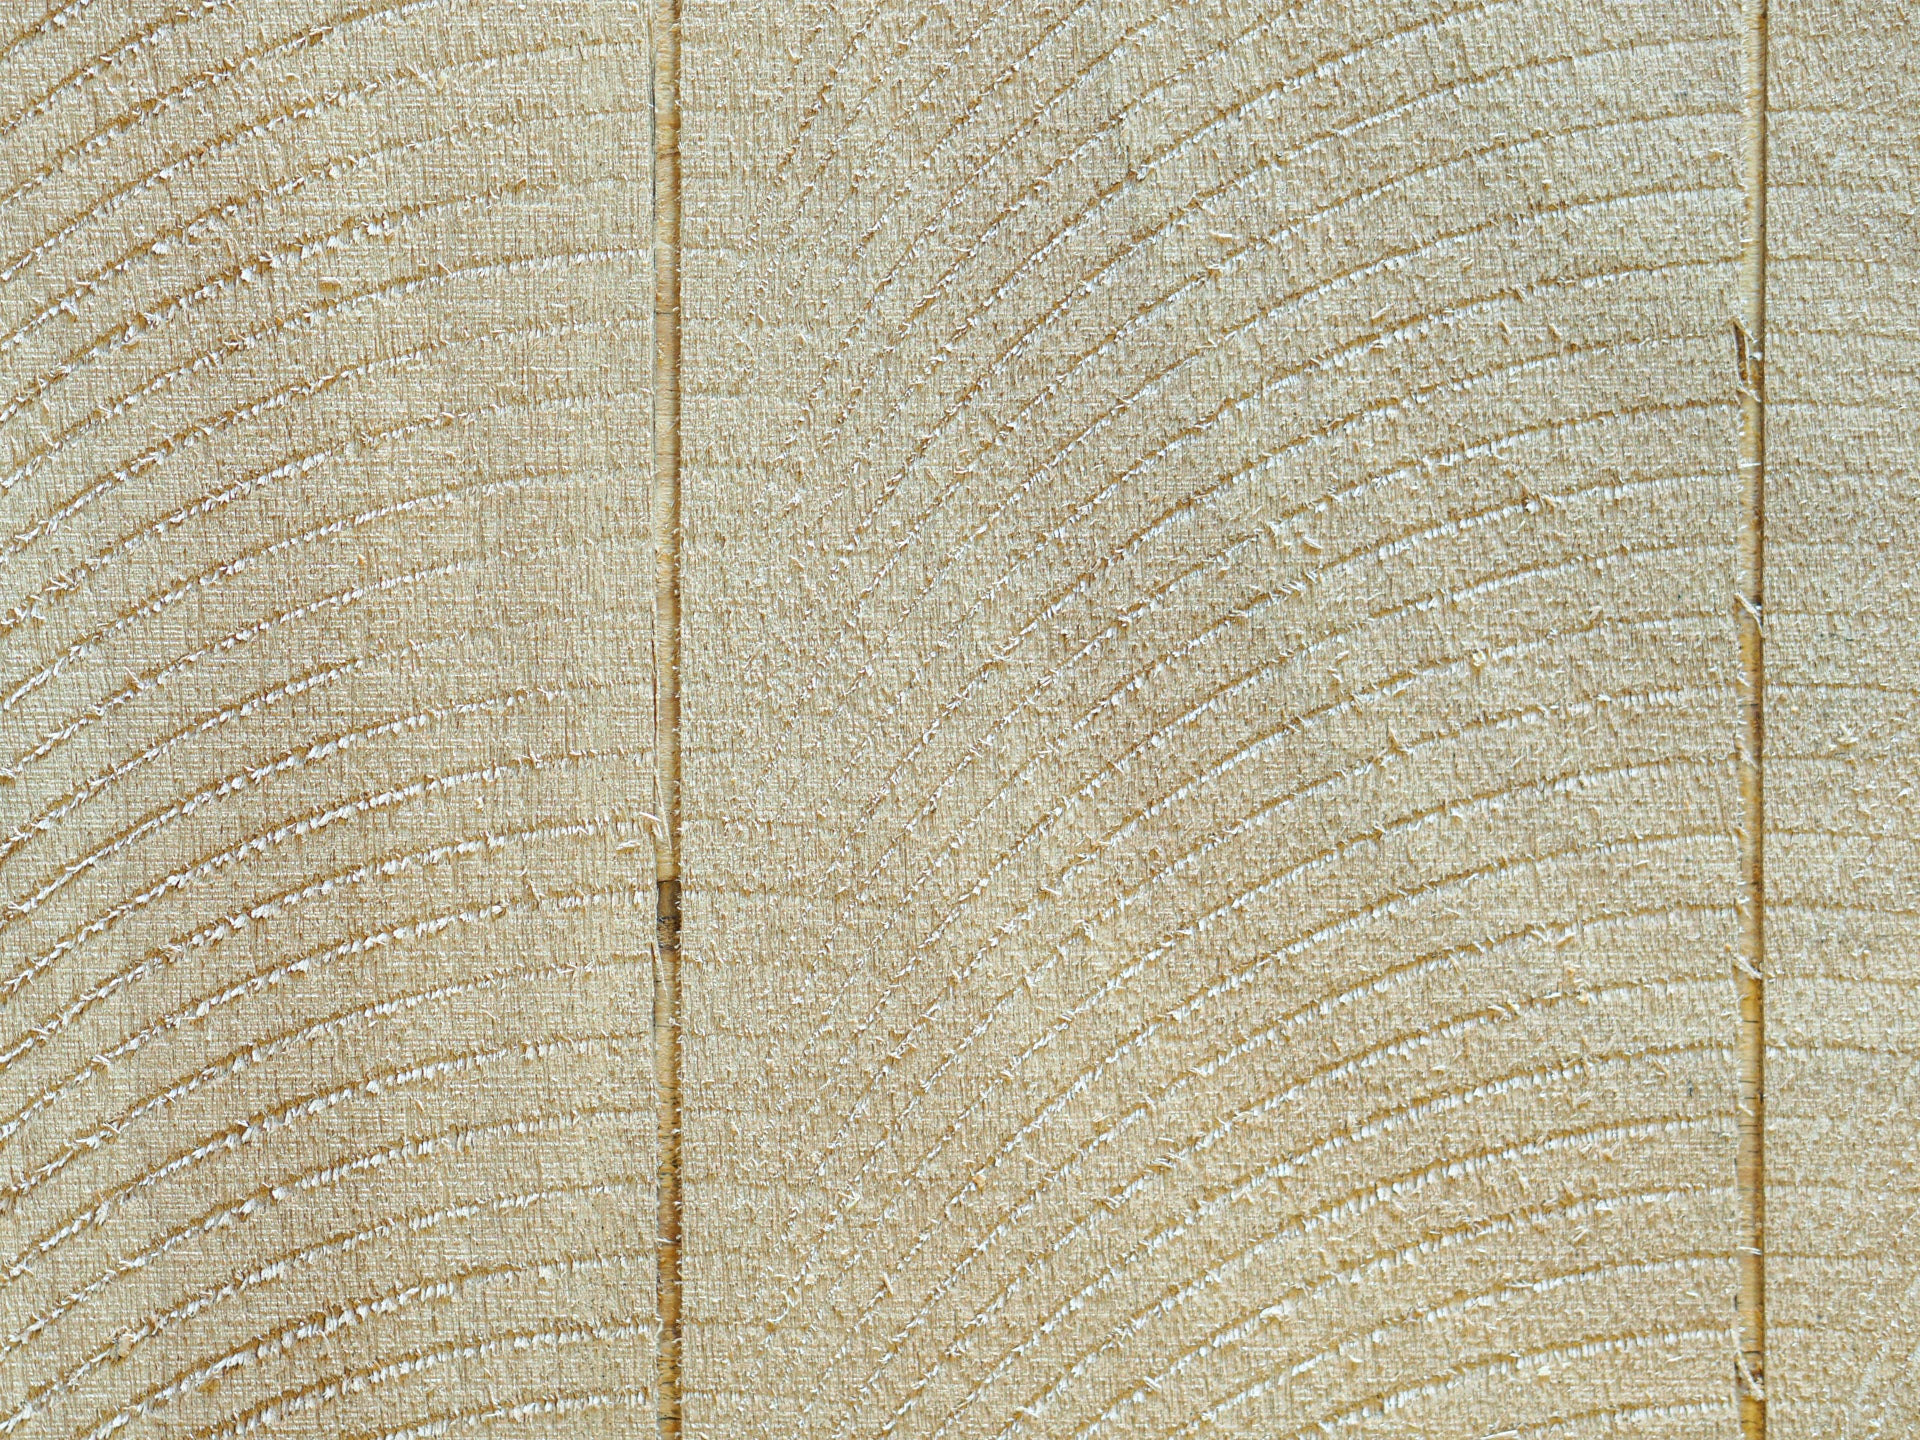 Close up of Planktex plywood pattern consisting of a rough saw, swirl appearance separated by 3/16” grooves, 8” on center, used on Eichler & Streng homes